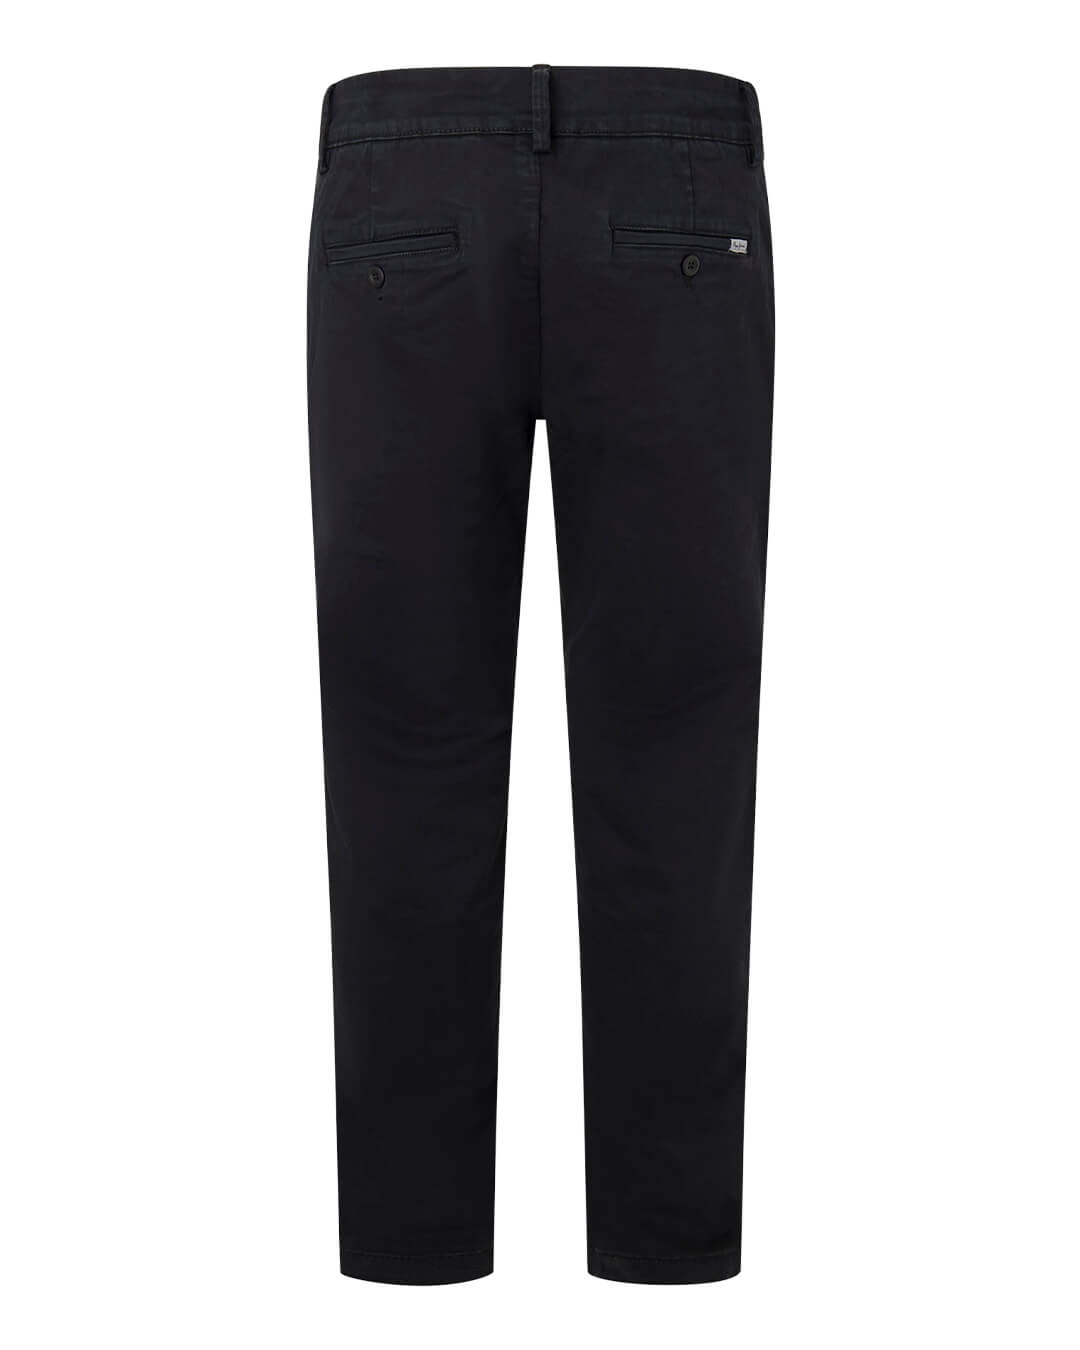 Pepe Jeans Trousers Pepe Jeans Black Slim Fit Twill Chinos